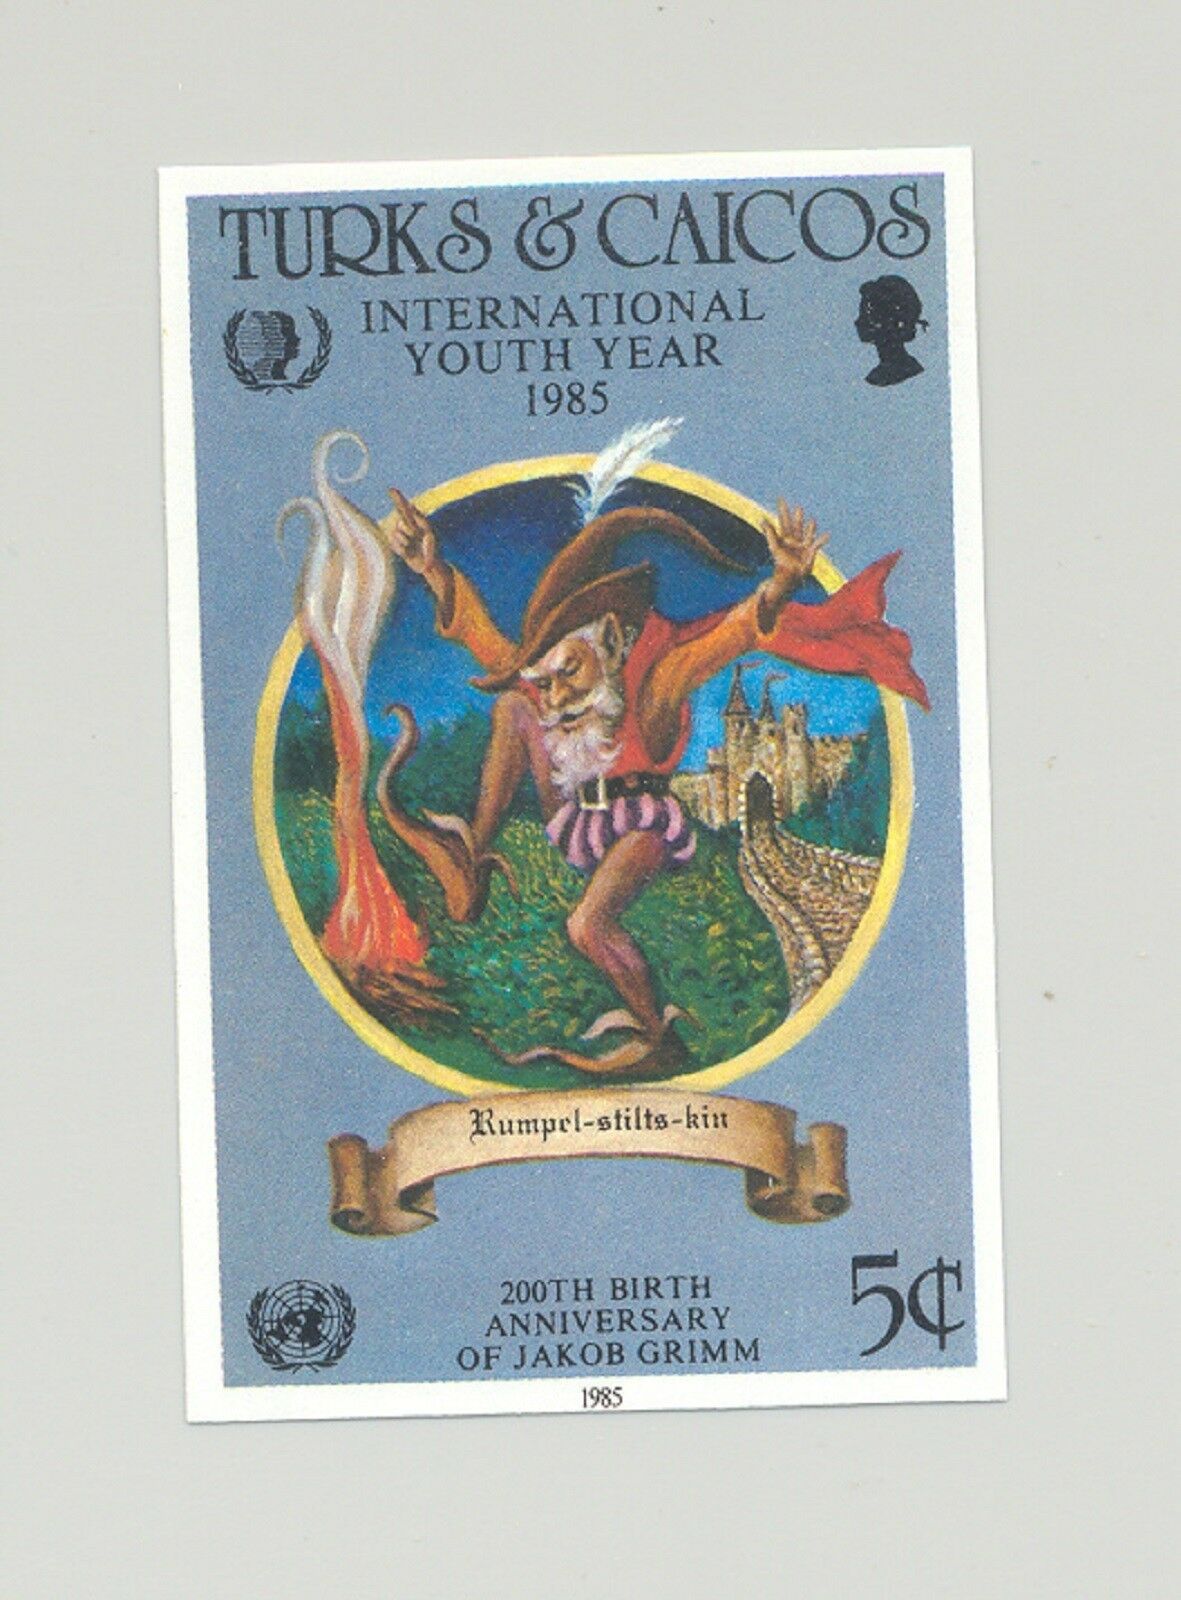 Turks & Caicos #674 Youth Year, Un, Grimm Fairy Tales 1v Imperf Proof